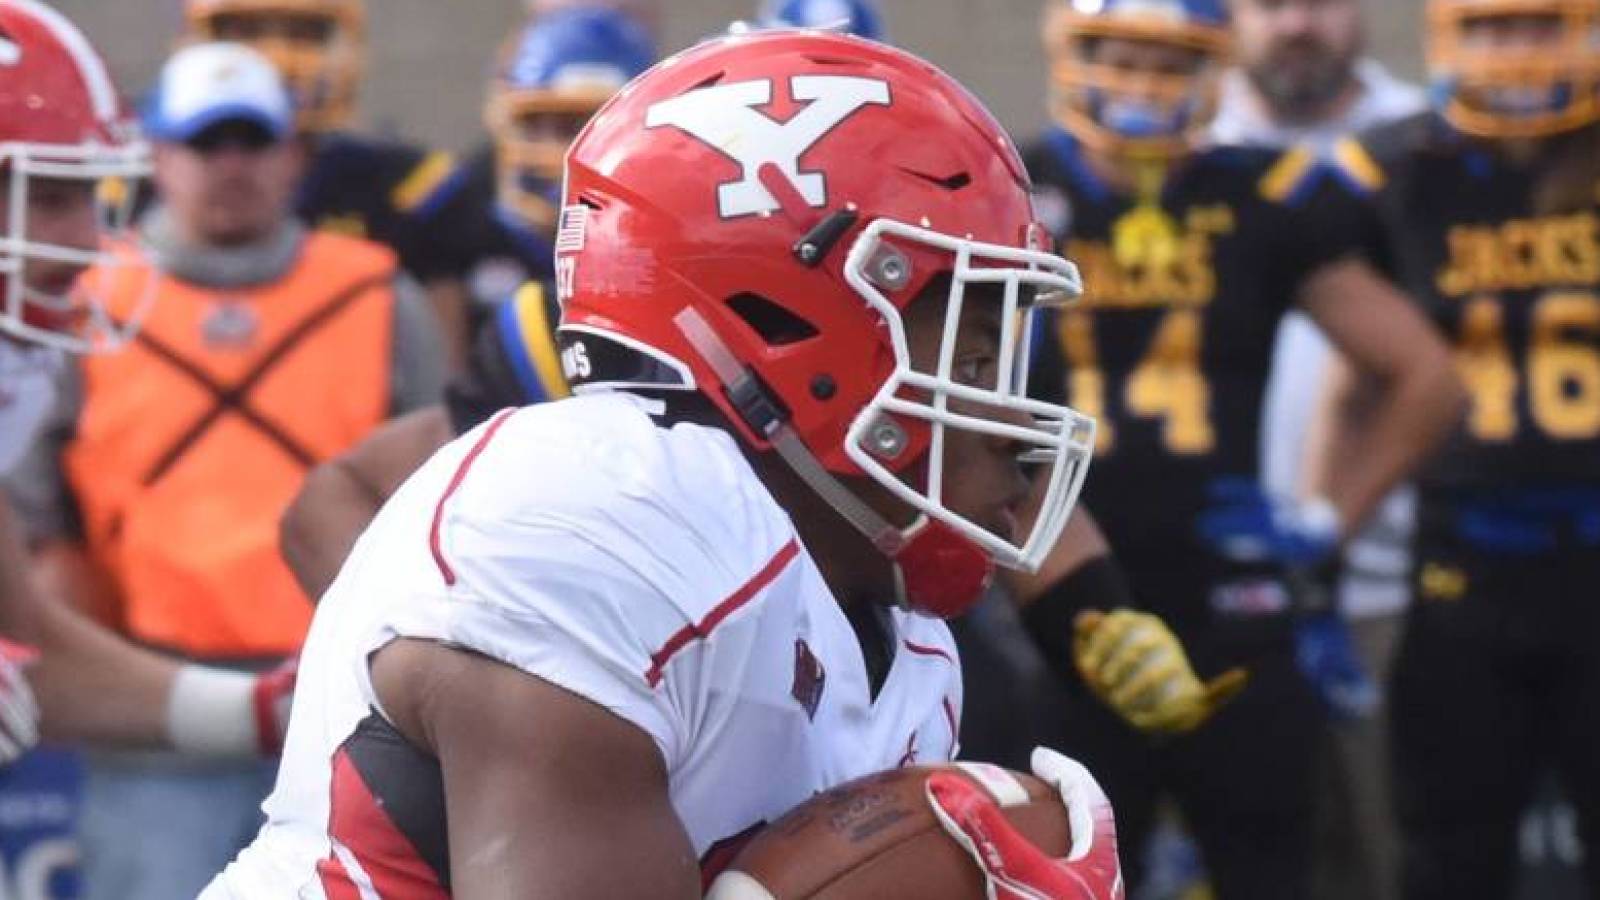 Youngstown State vs Northern Kentucky Live Stream Online